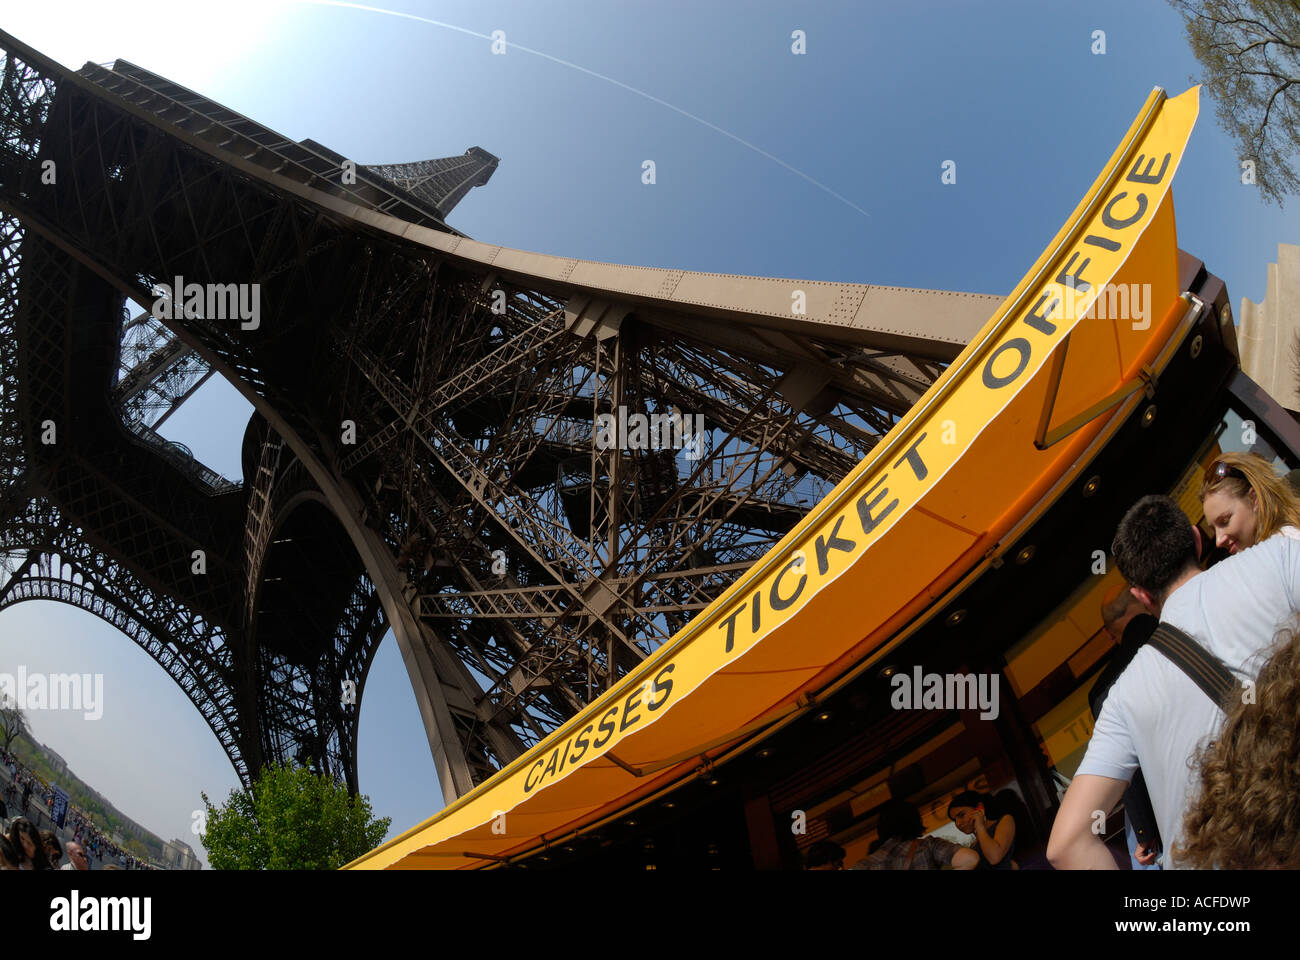 ticket office at the bottom of the eiffel tower in paris, france. Stock Photo